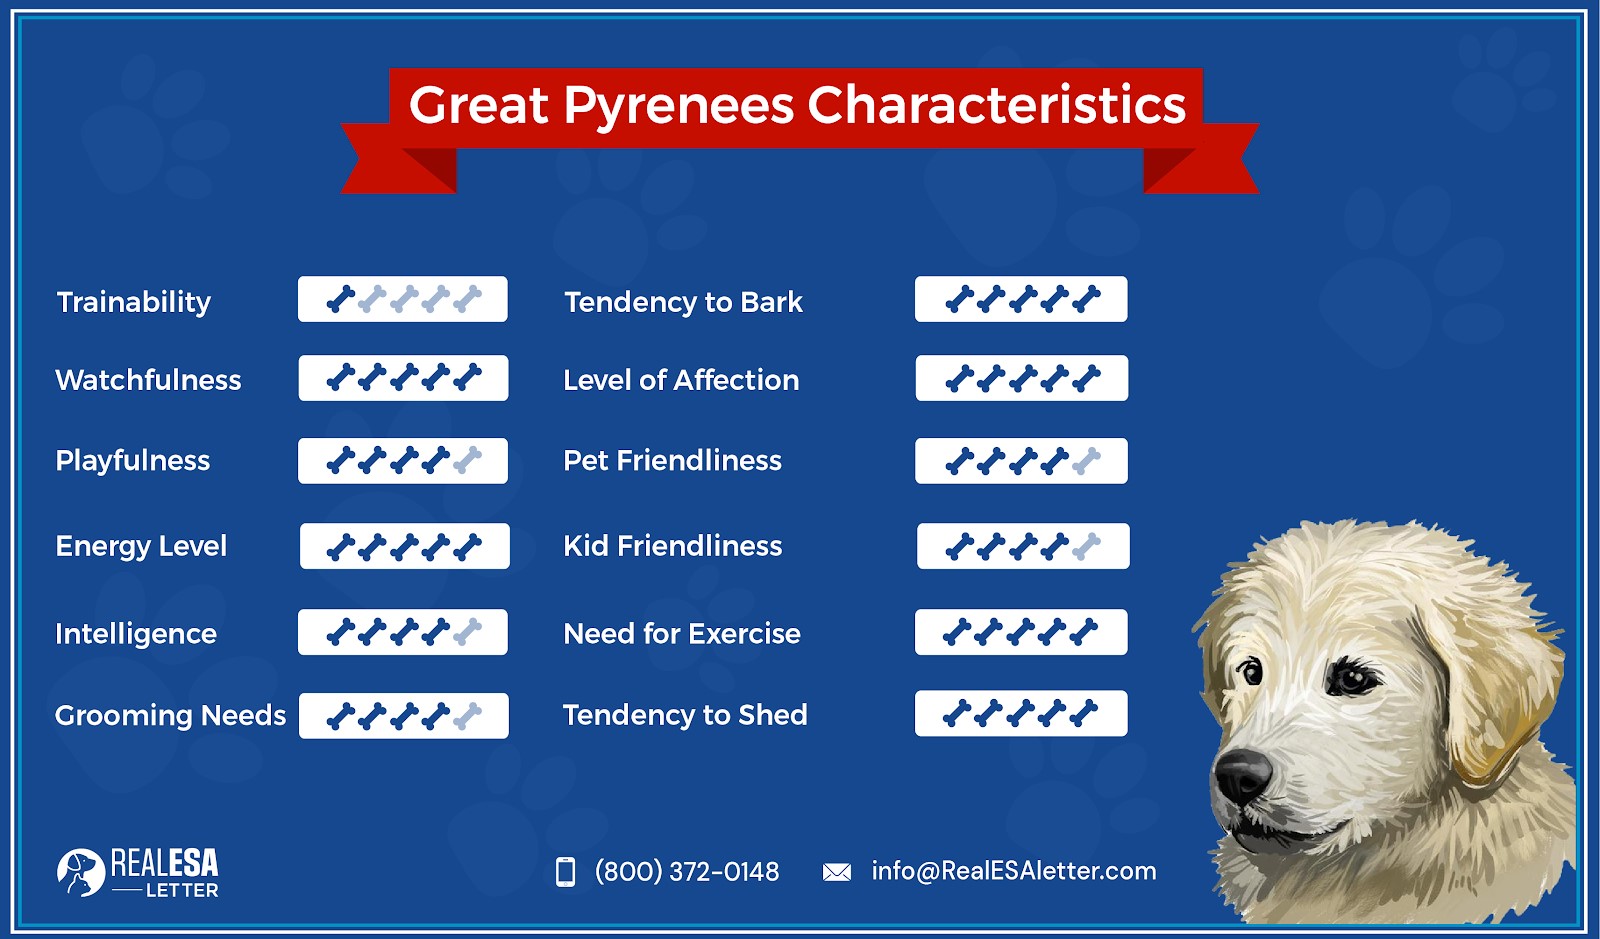 Great Pyrenees Breed Overview